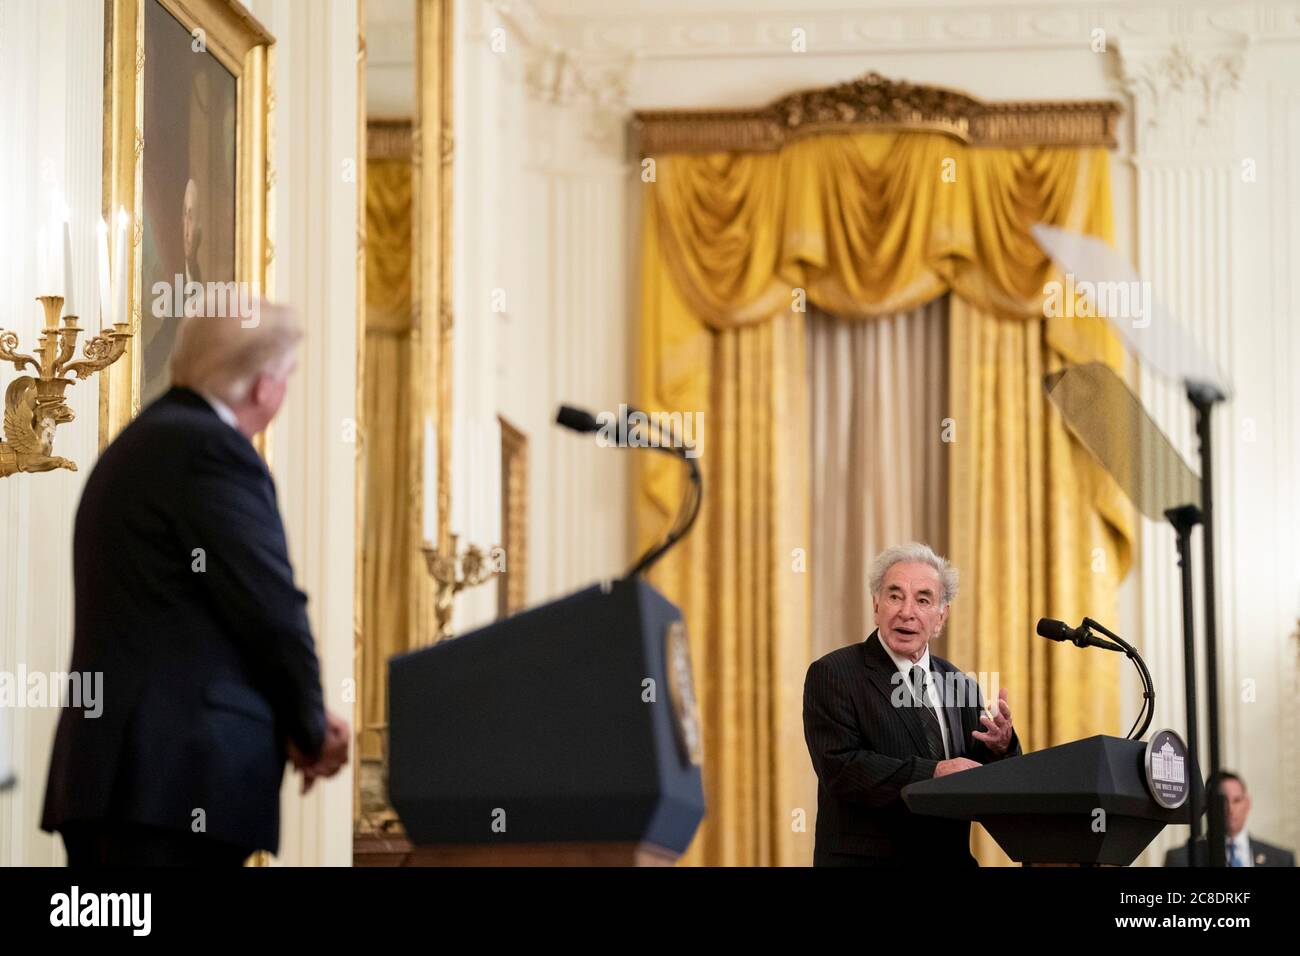 Washington, United States Of America. 22nd July, 2020. Washington, United States of America. 22 July, 2020. U.S. President Donald Trump listens as Sam Vigil talks about the murder of his wife during the announcement of Operation Legend, to combat violent crime in the East Room of the White House July 22, 2020 in Washington, DC Trump plans to send federal law enforcement to cities around the country in what is widely viewed as an attempt to suppress Black Lives Matter protests. Credit: Tia Dufour/White House Photo/Alamy Live News Stock Photo